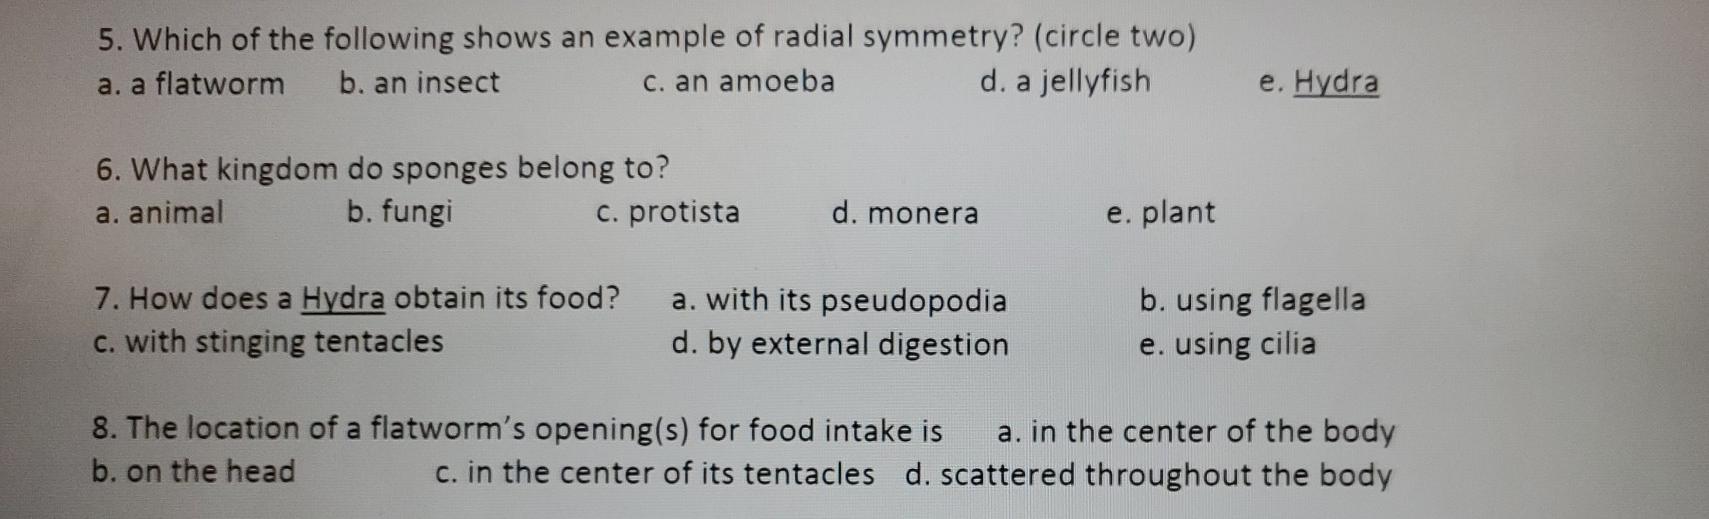 5. Which of the following shows an example of radial symmetry? (circle two) a. a flatworm b. an insect c. an amoeba d. a jell